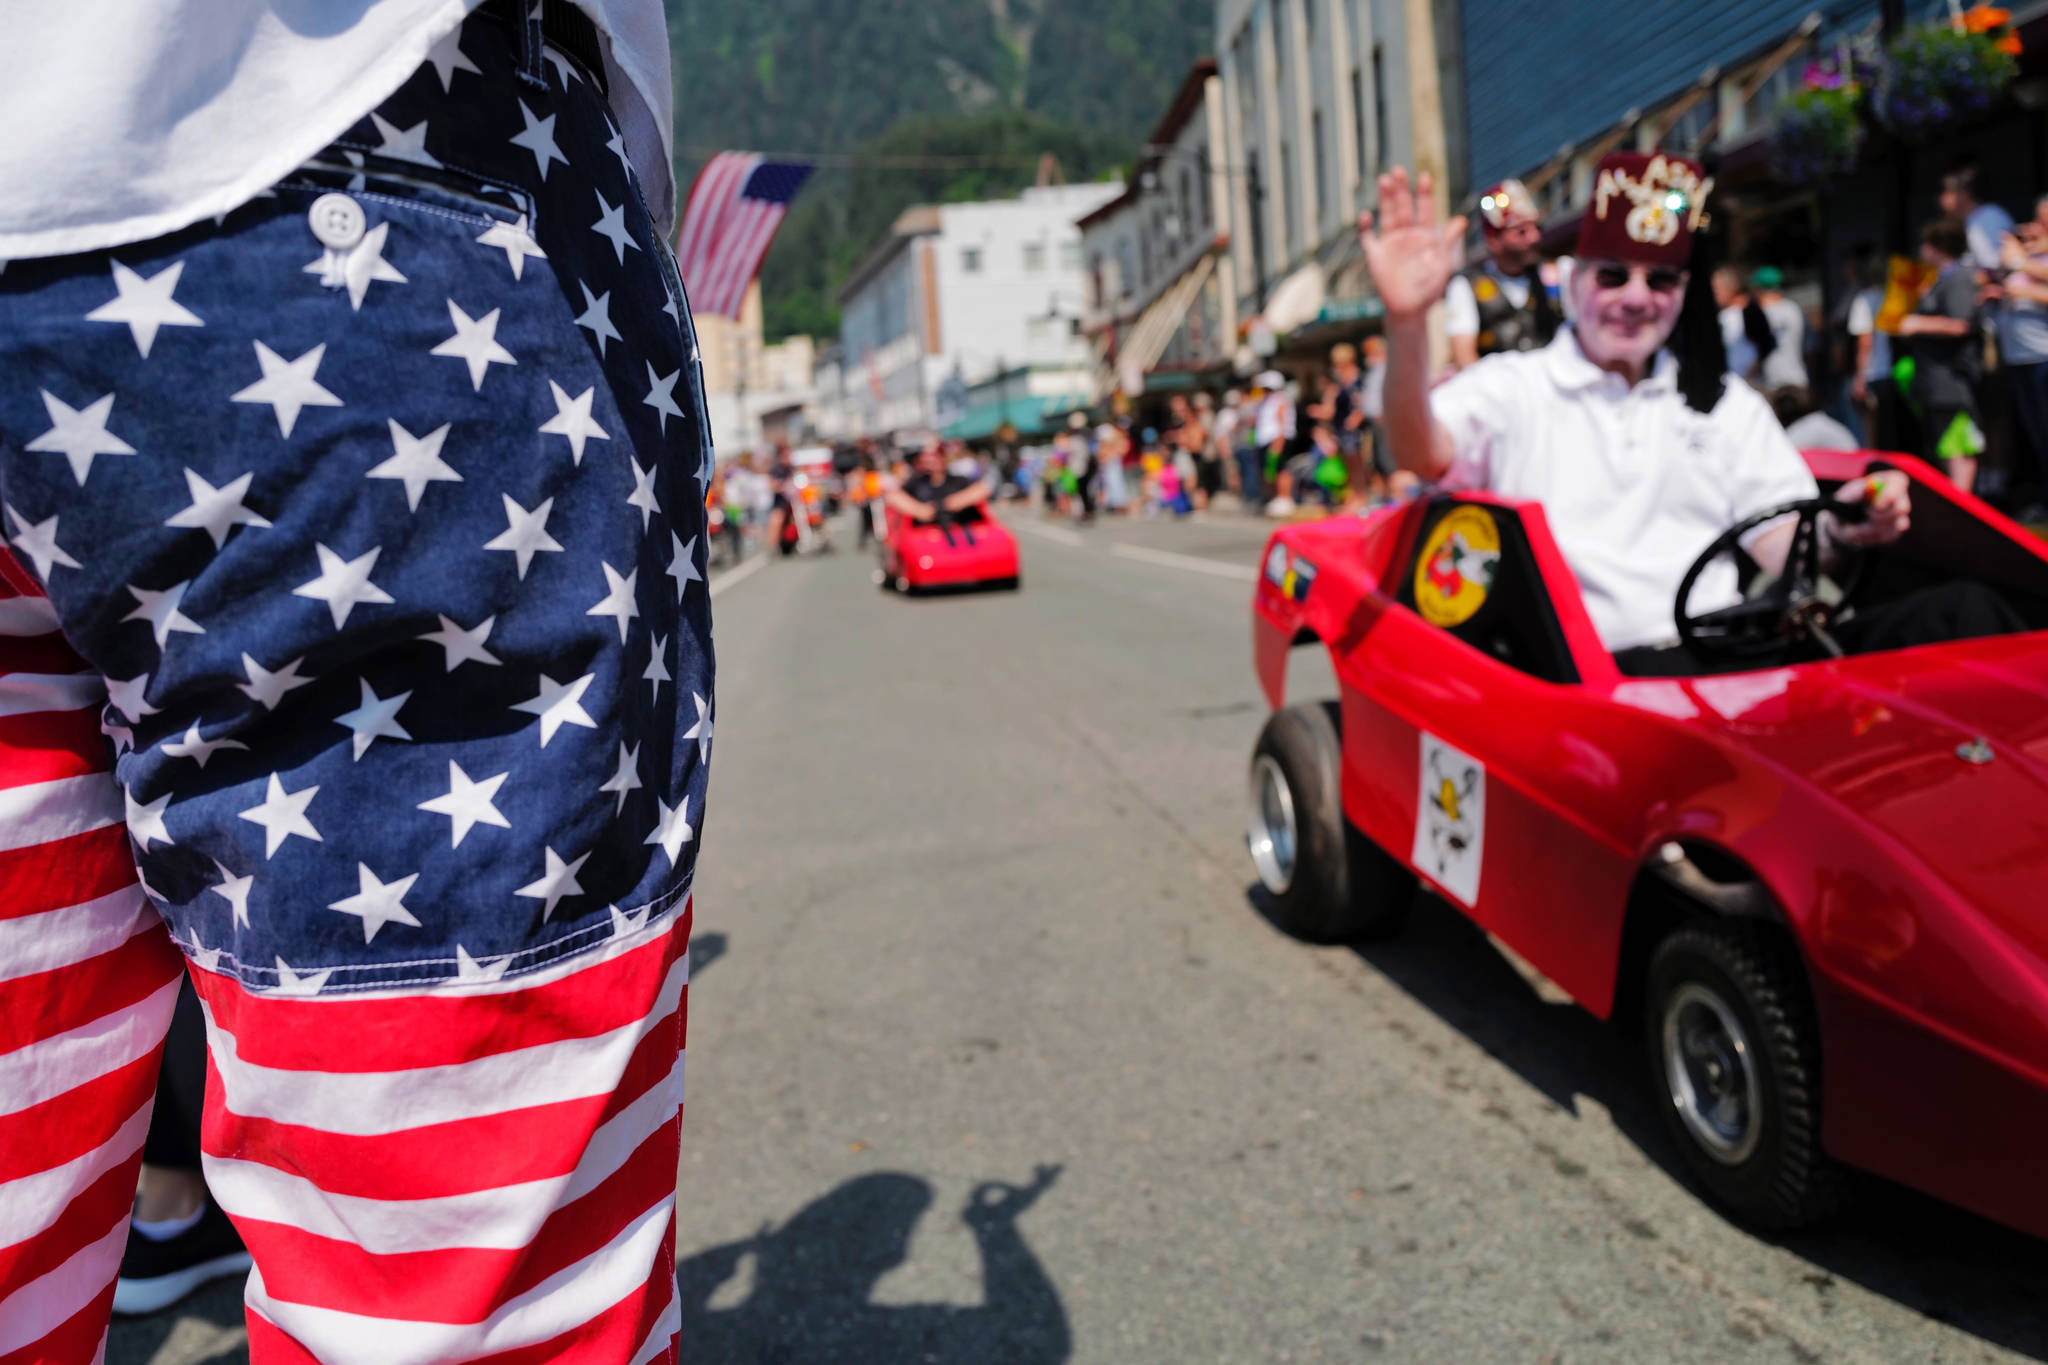 Shriners drive their little cars during the Fourth of July parade on Thursday, July 4, 2019. (Michael Penn | Juneau Empire)